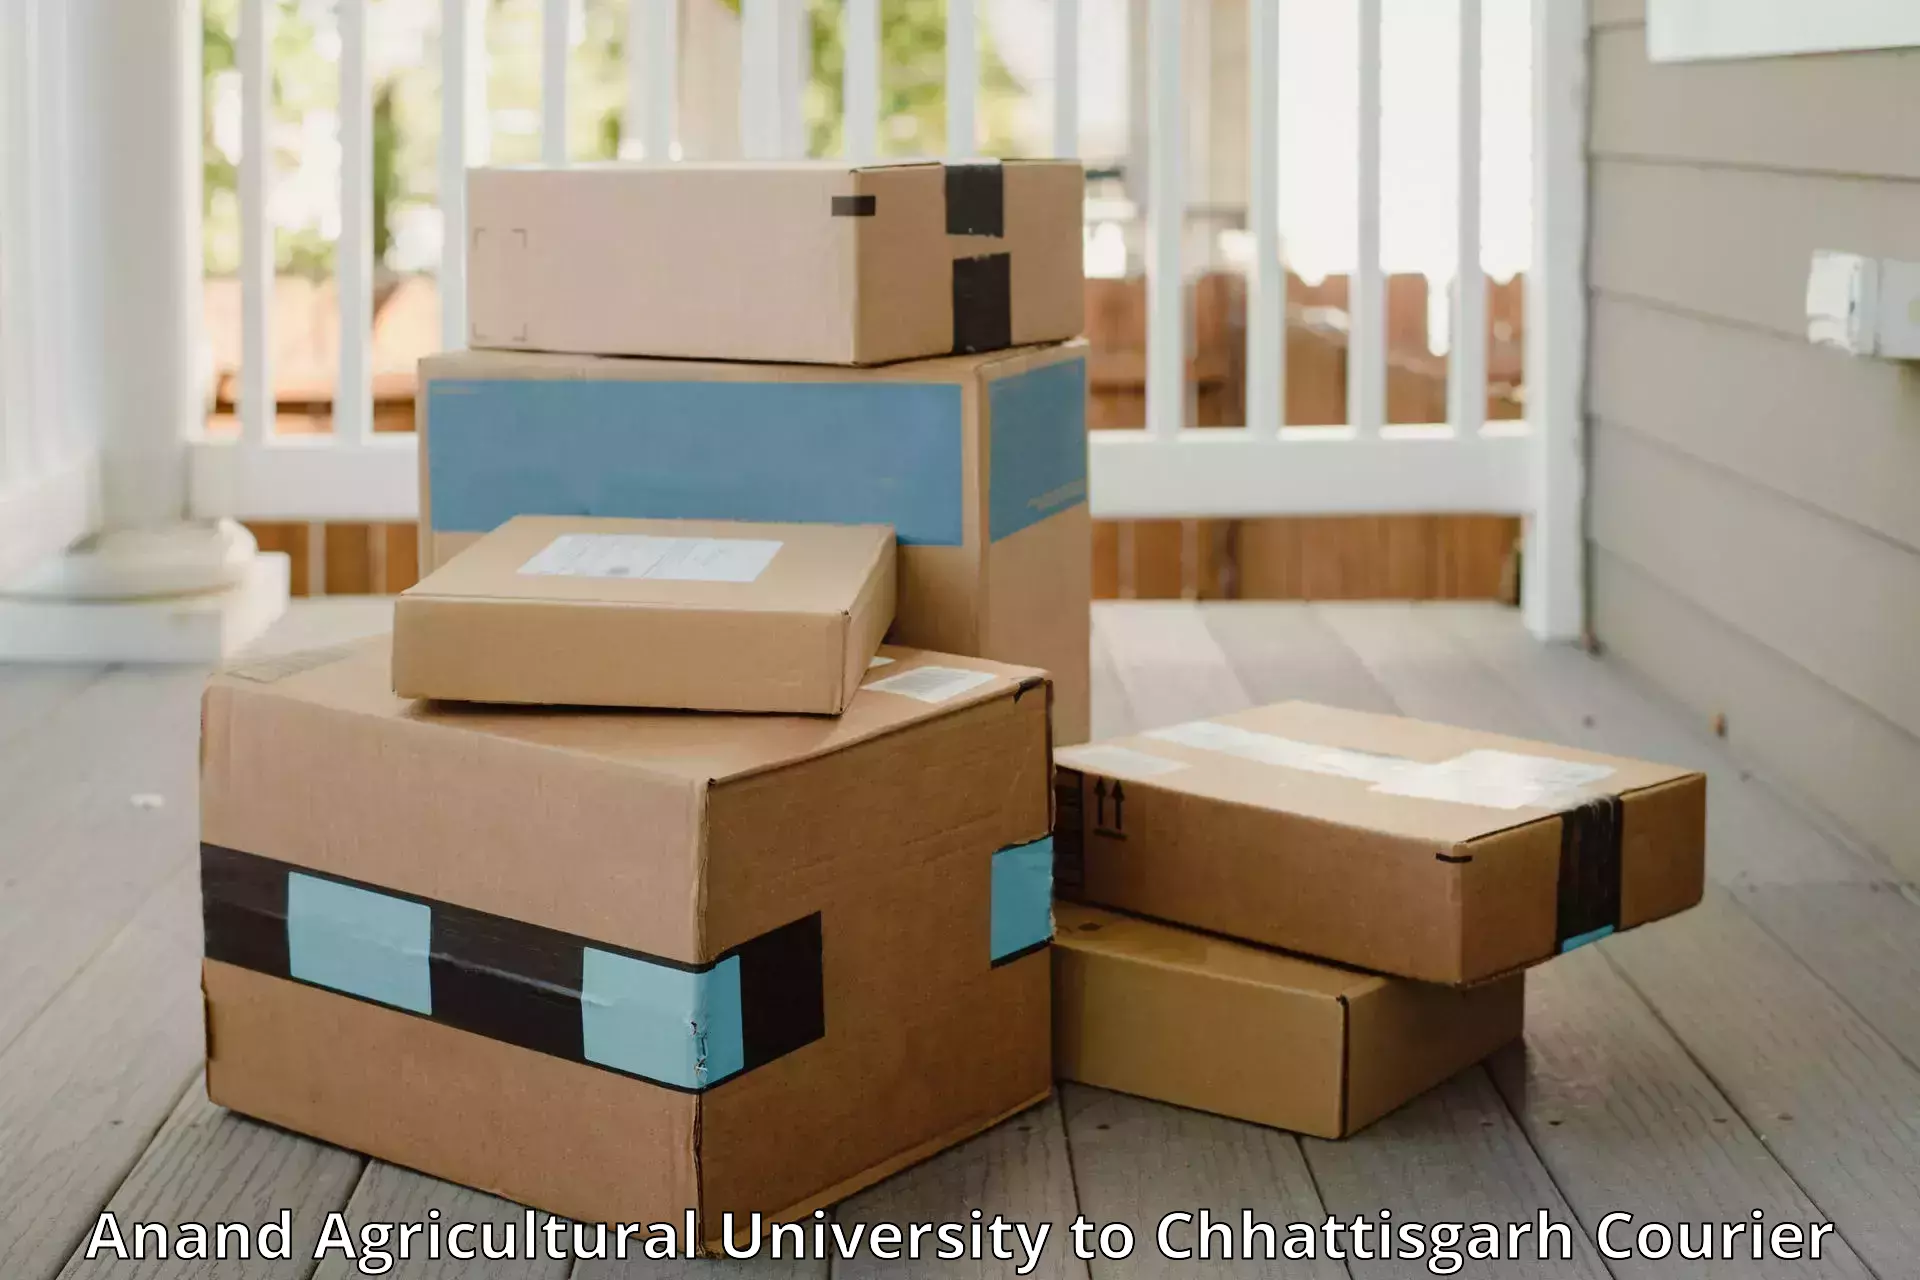 Quick luggage shipment Anand Agricultural University to Bijapur Chhattisgarh